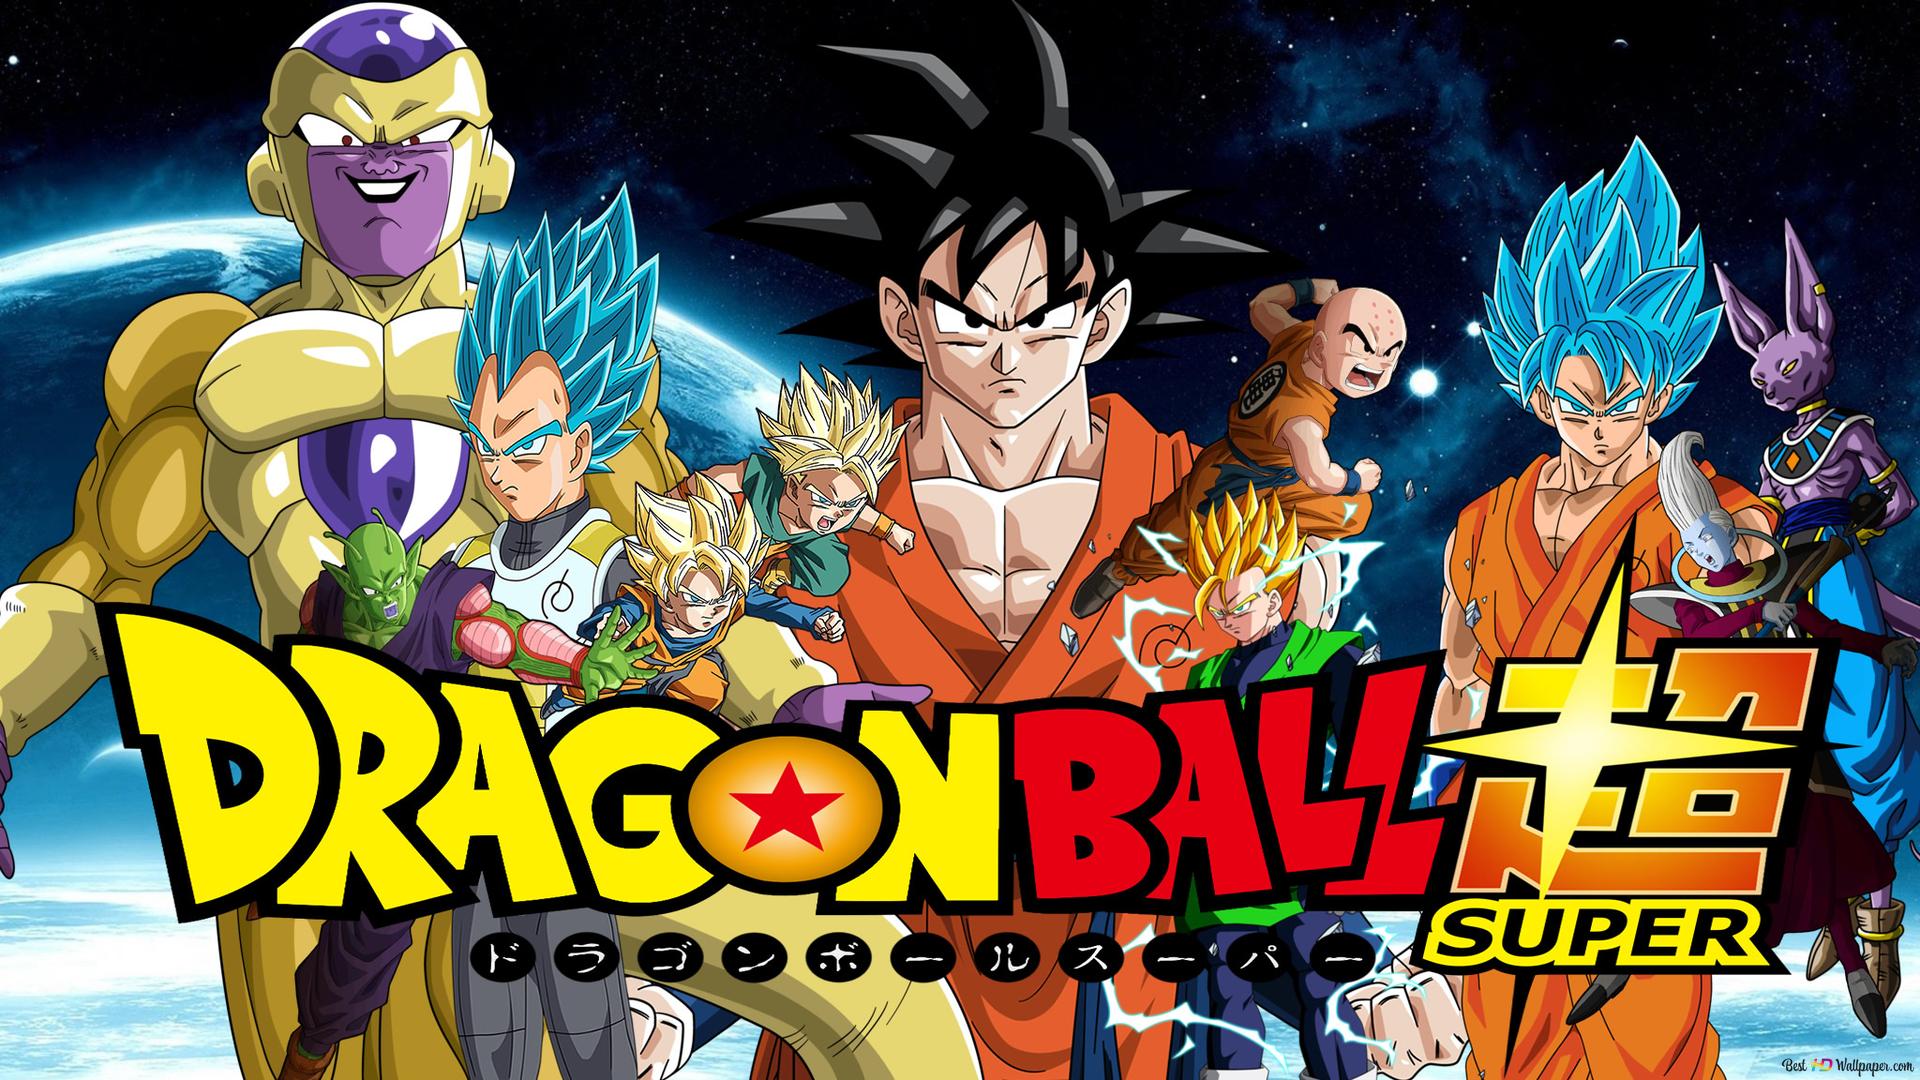 Anime Ball Super Characters 2K wallpaper download